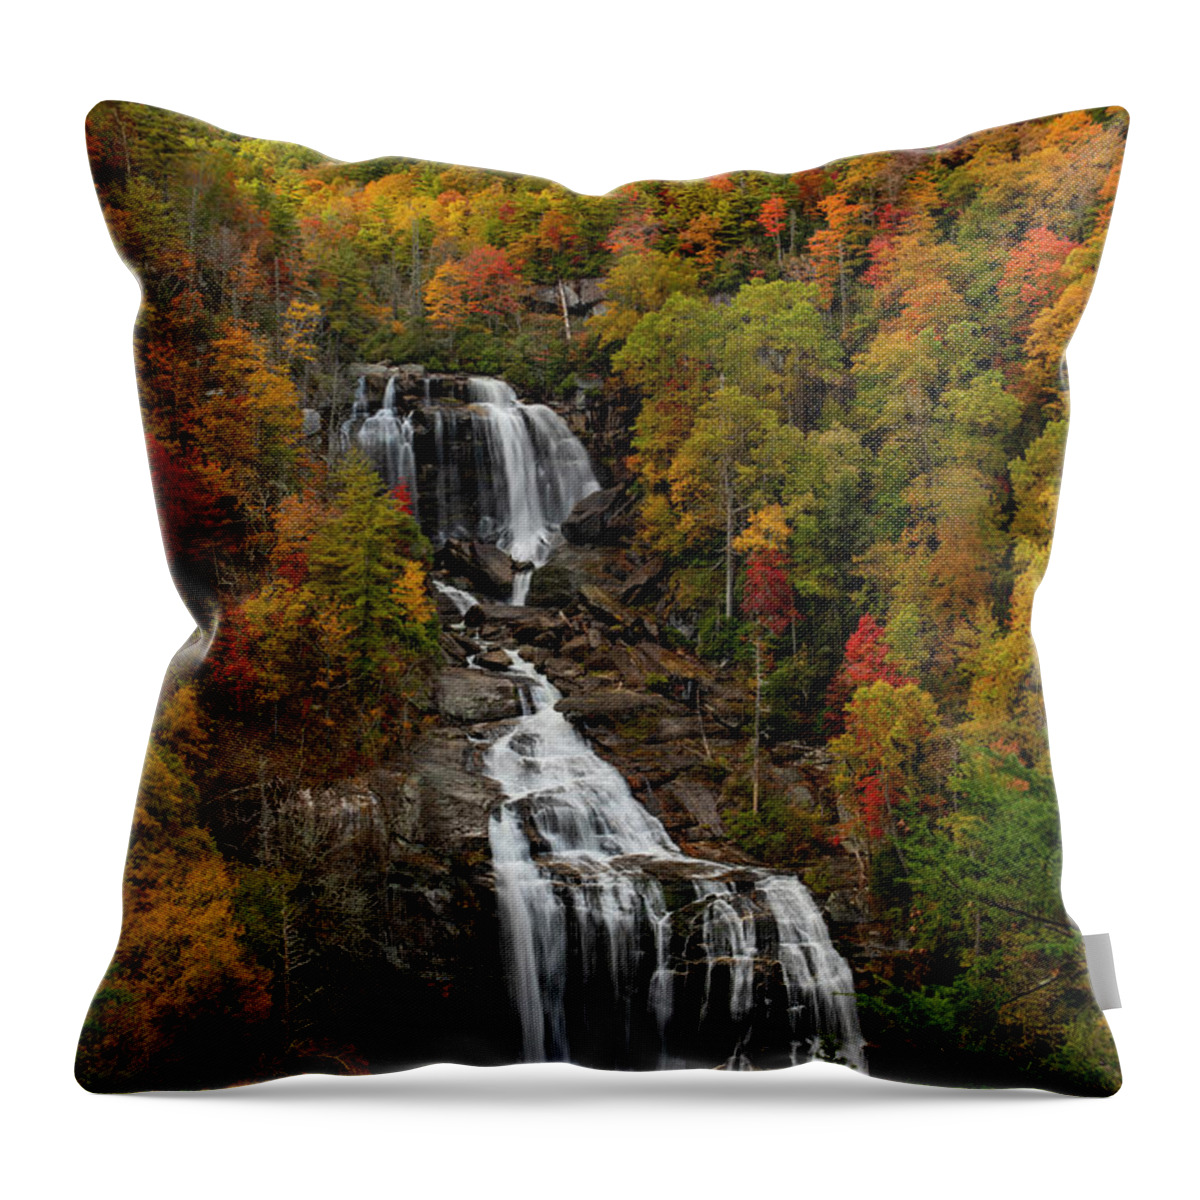 Whitewater Falls In Autumn Throw Pillow featuring the photograph Whitewater Falls In Autumn by Dan Sproul